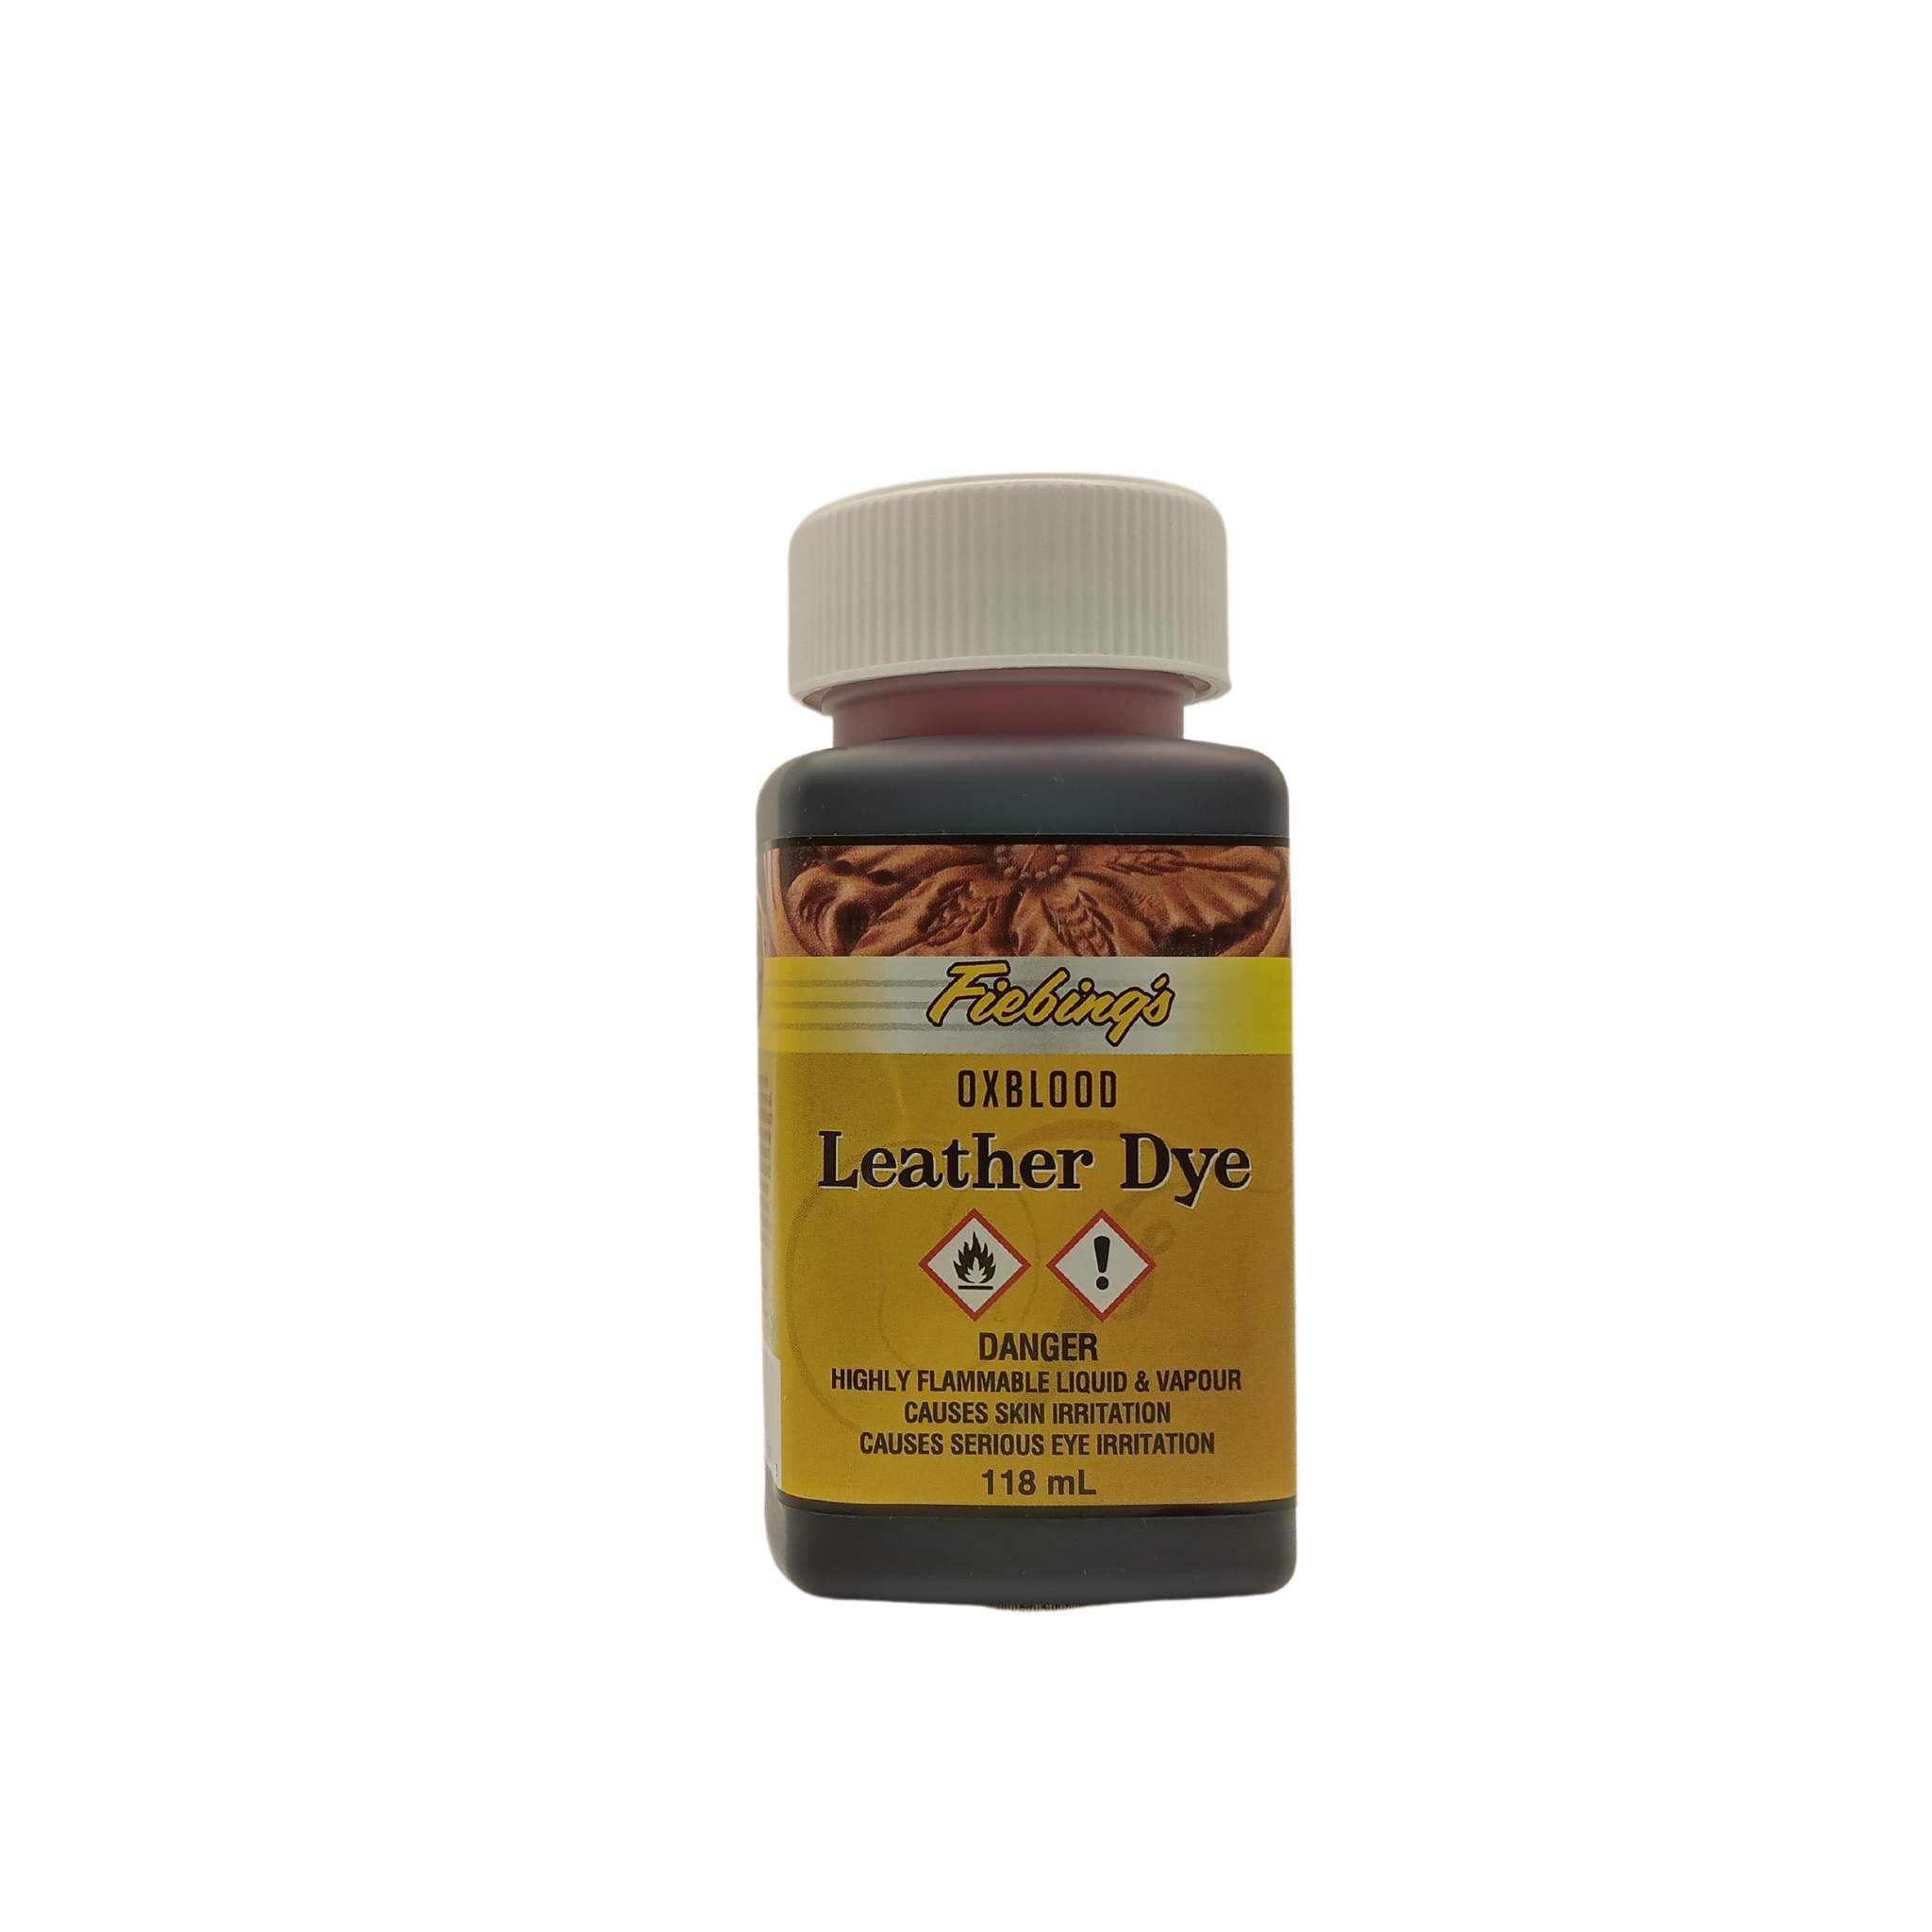 Dye your leathercraft projects with this Fiebing's solvent based leather dye - Oxblood